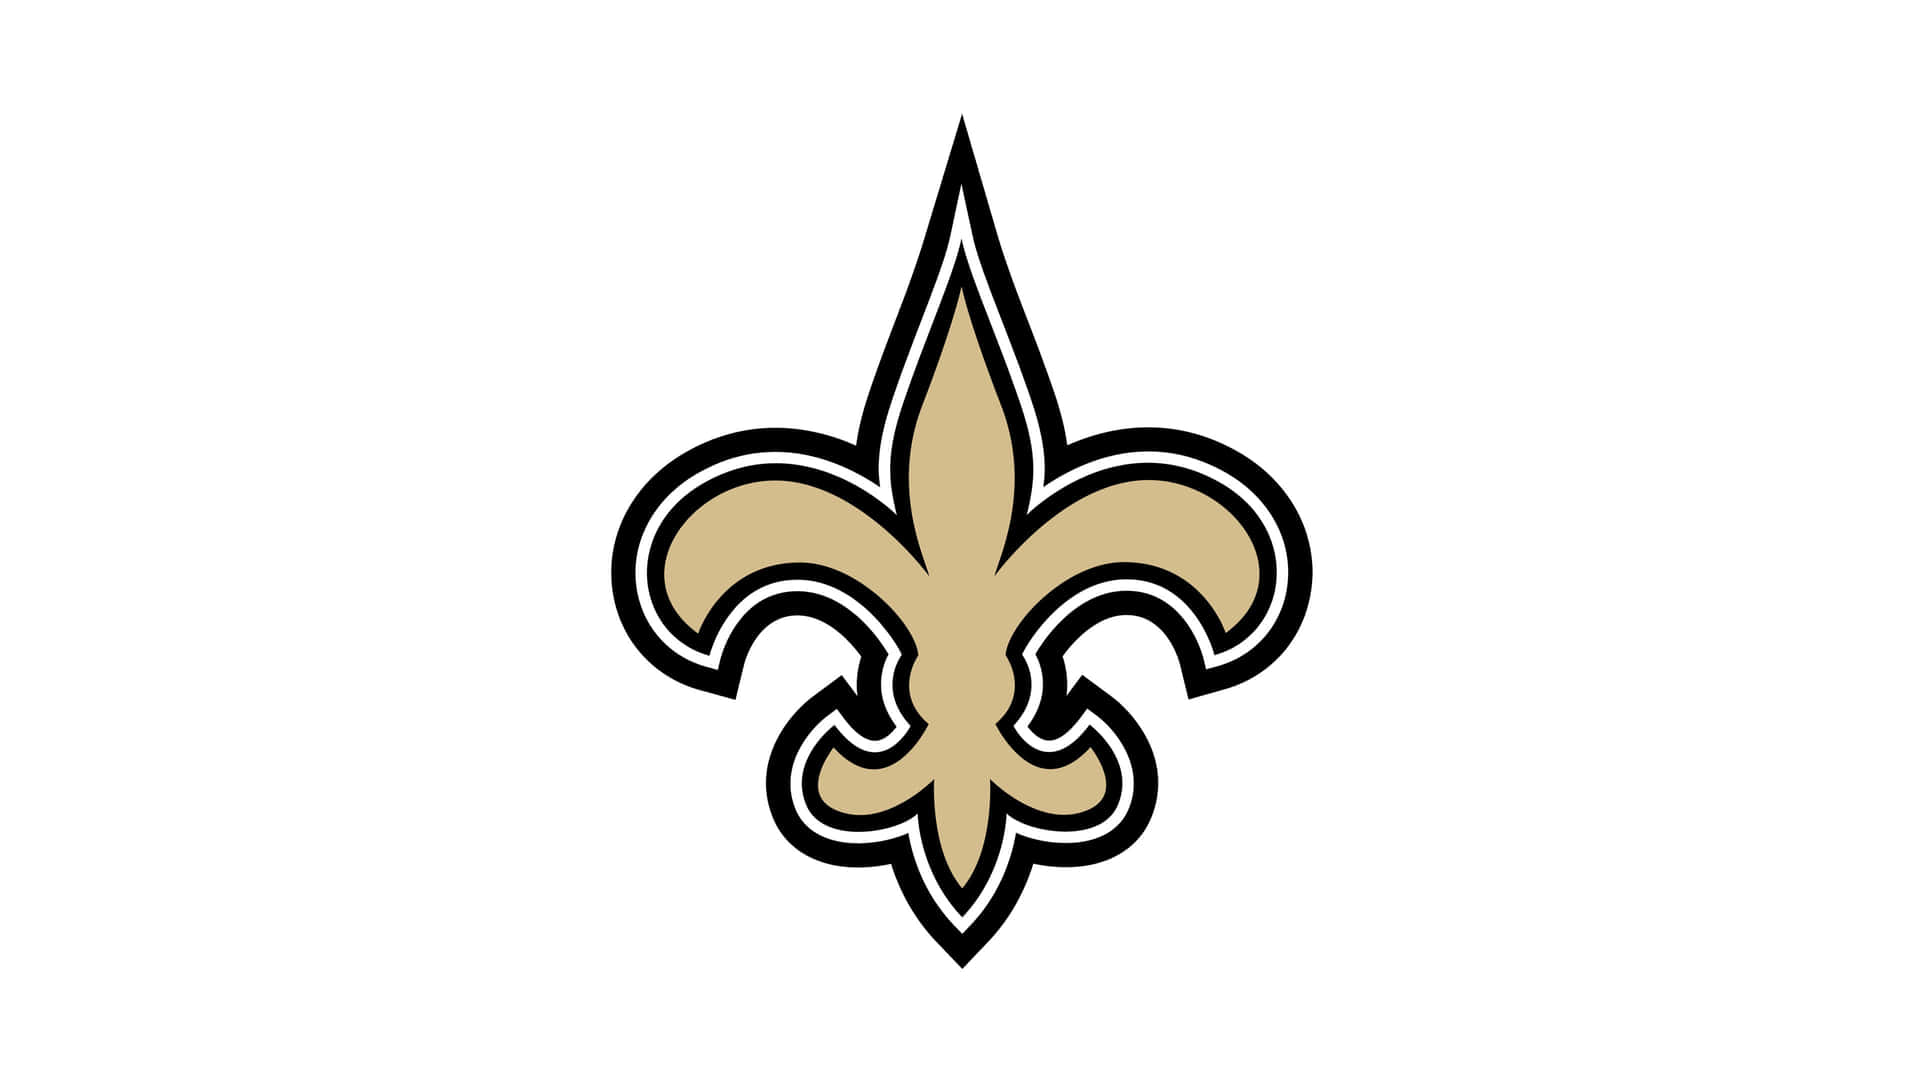 Behind The Experience - The New Orleans Saints Wallpaper